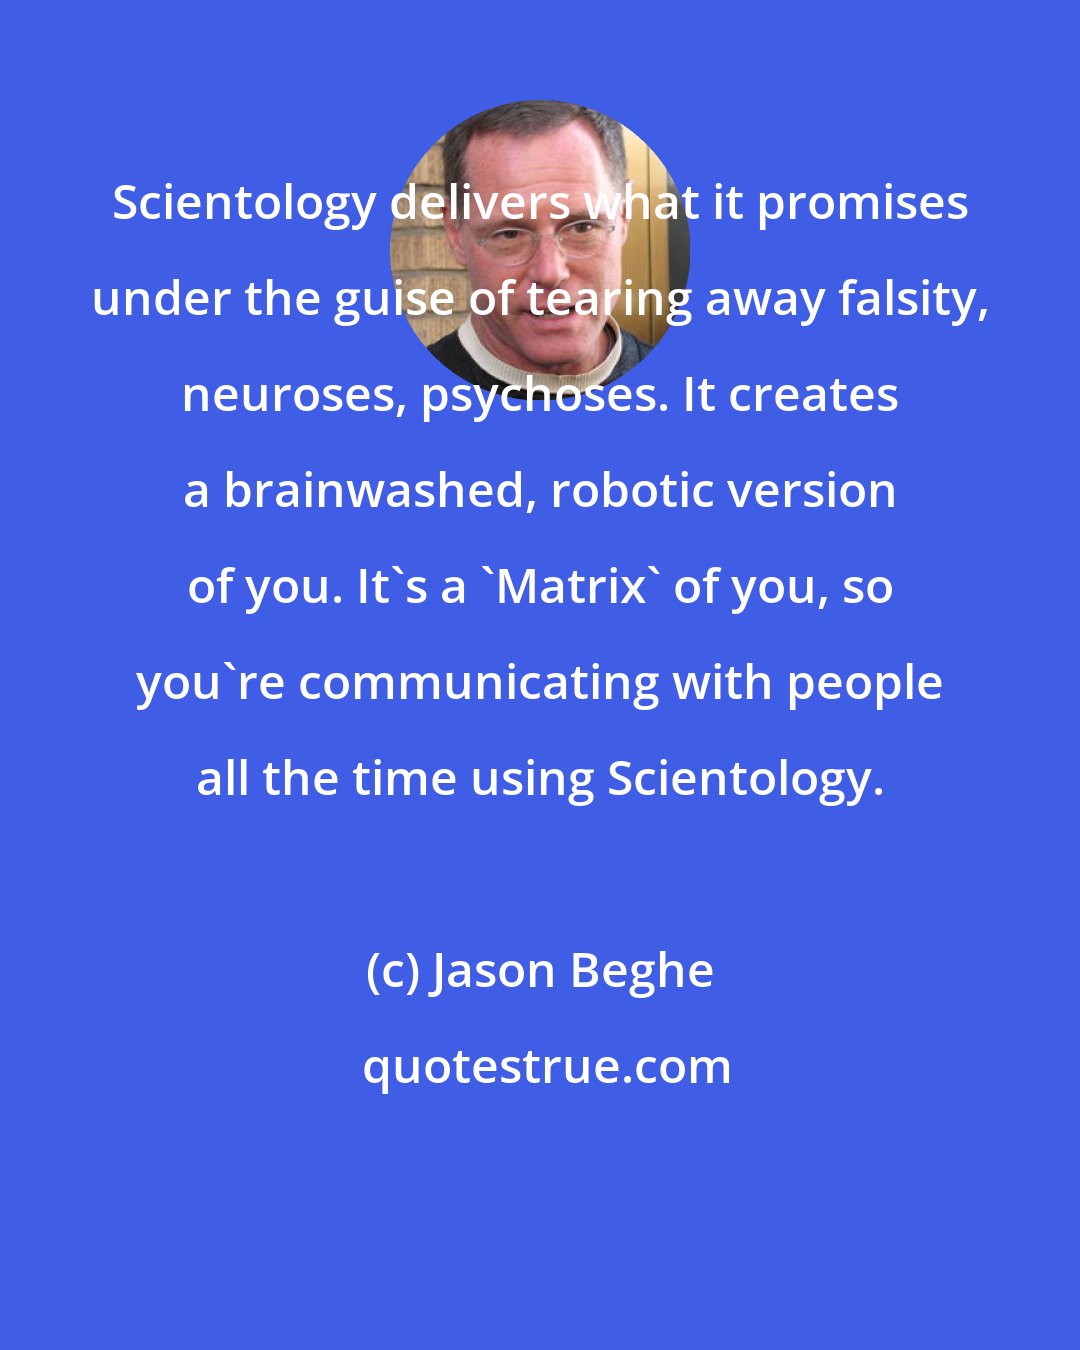 Jason Beghe: Scientology delivers what it promises under the guise of tearing away falsity, neuroses, psychoses. It creates a brainwashed, robotic version of you. It's a 'Matrix' of you, so you're communicating with people all the time using Scientology.